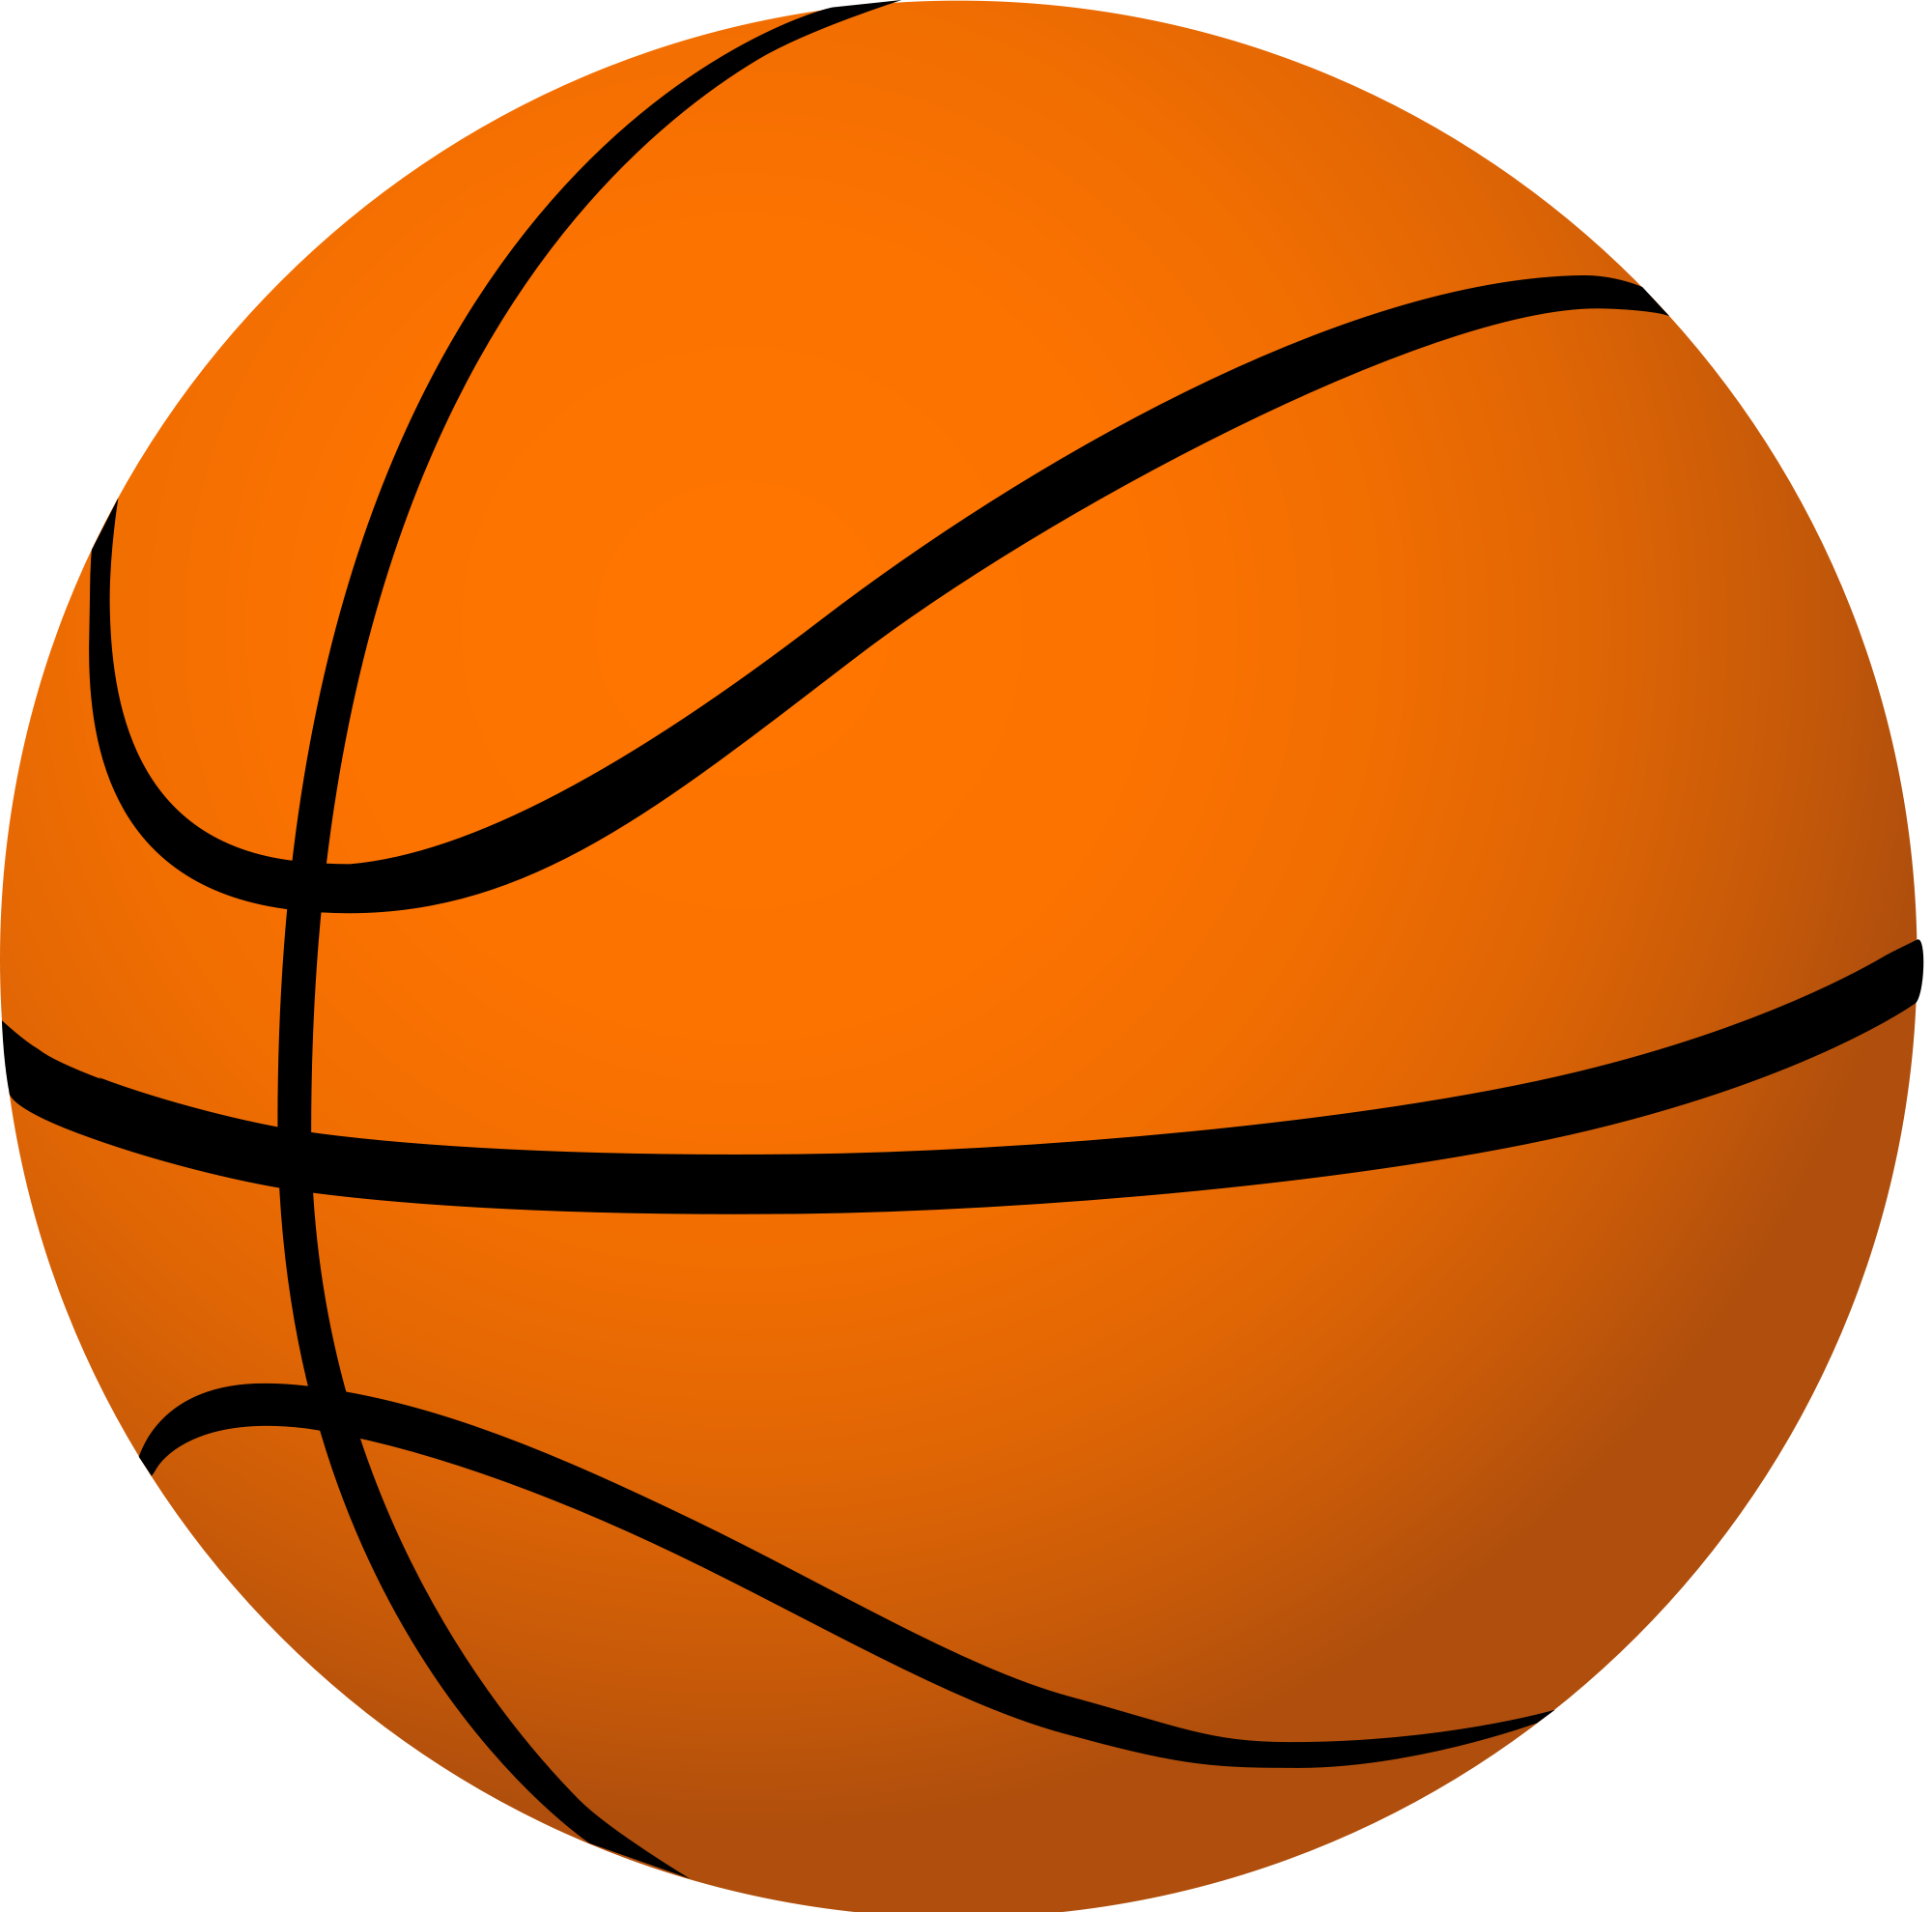 Basketball clipart images